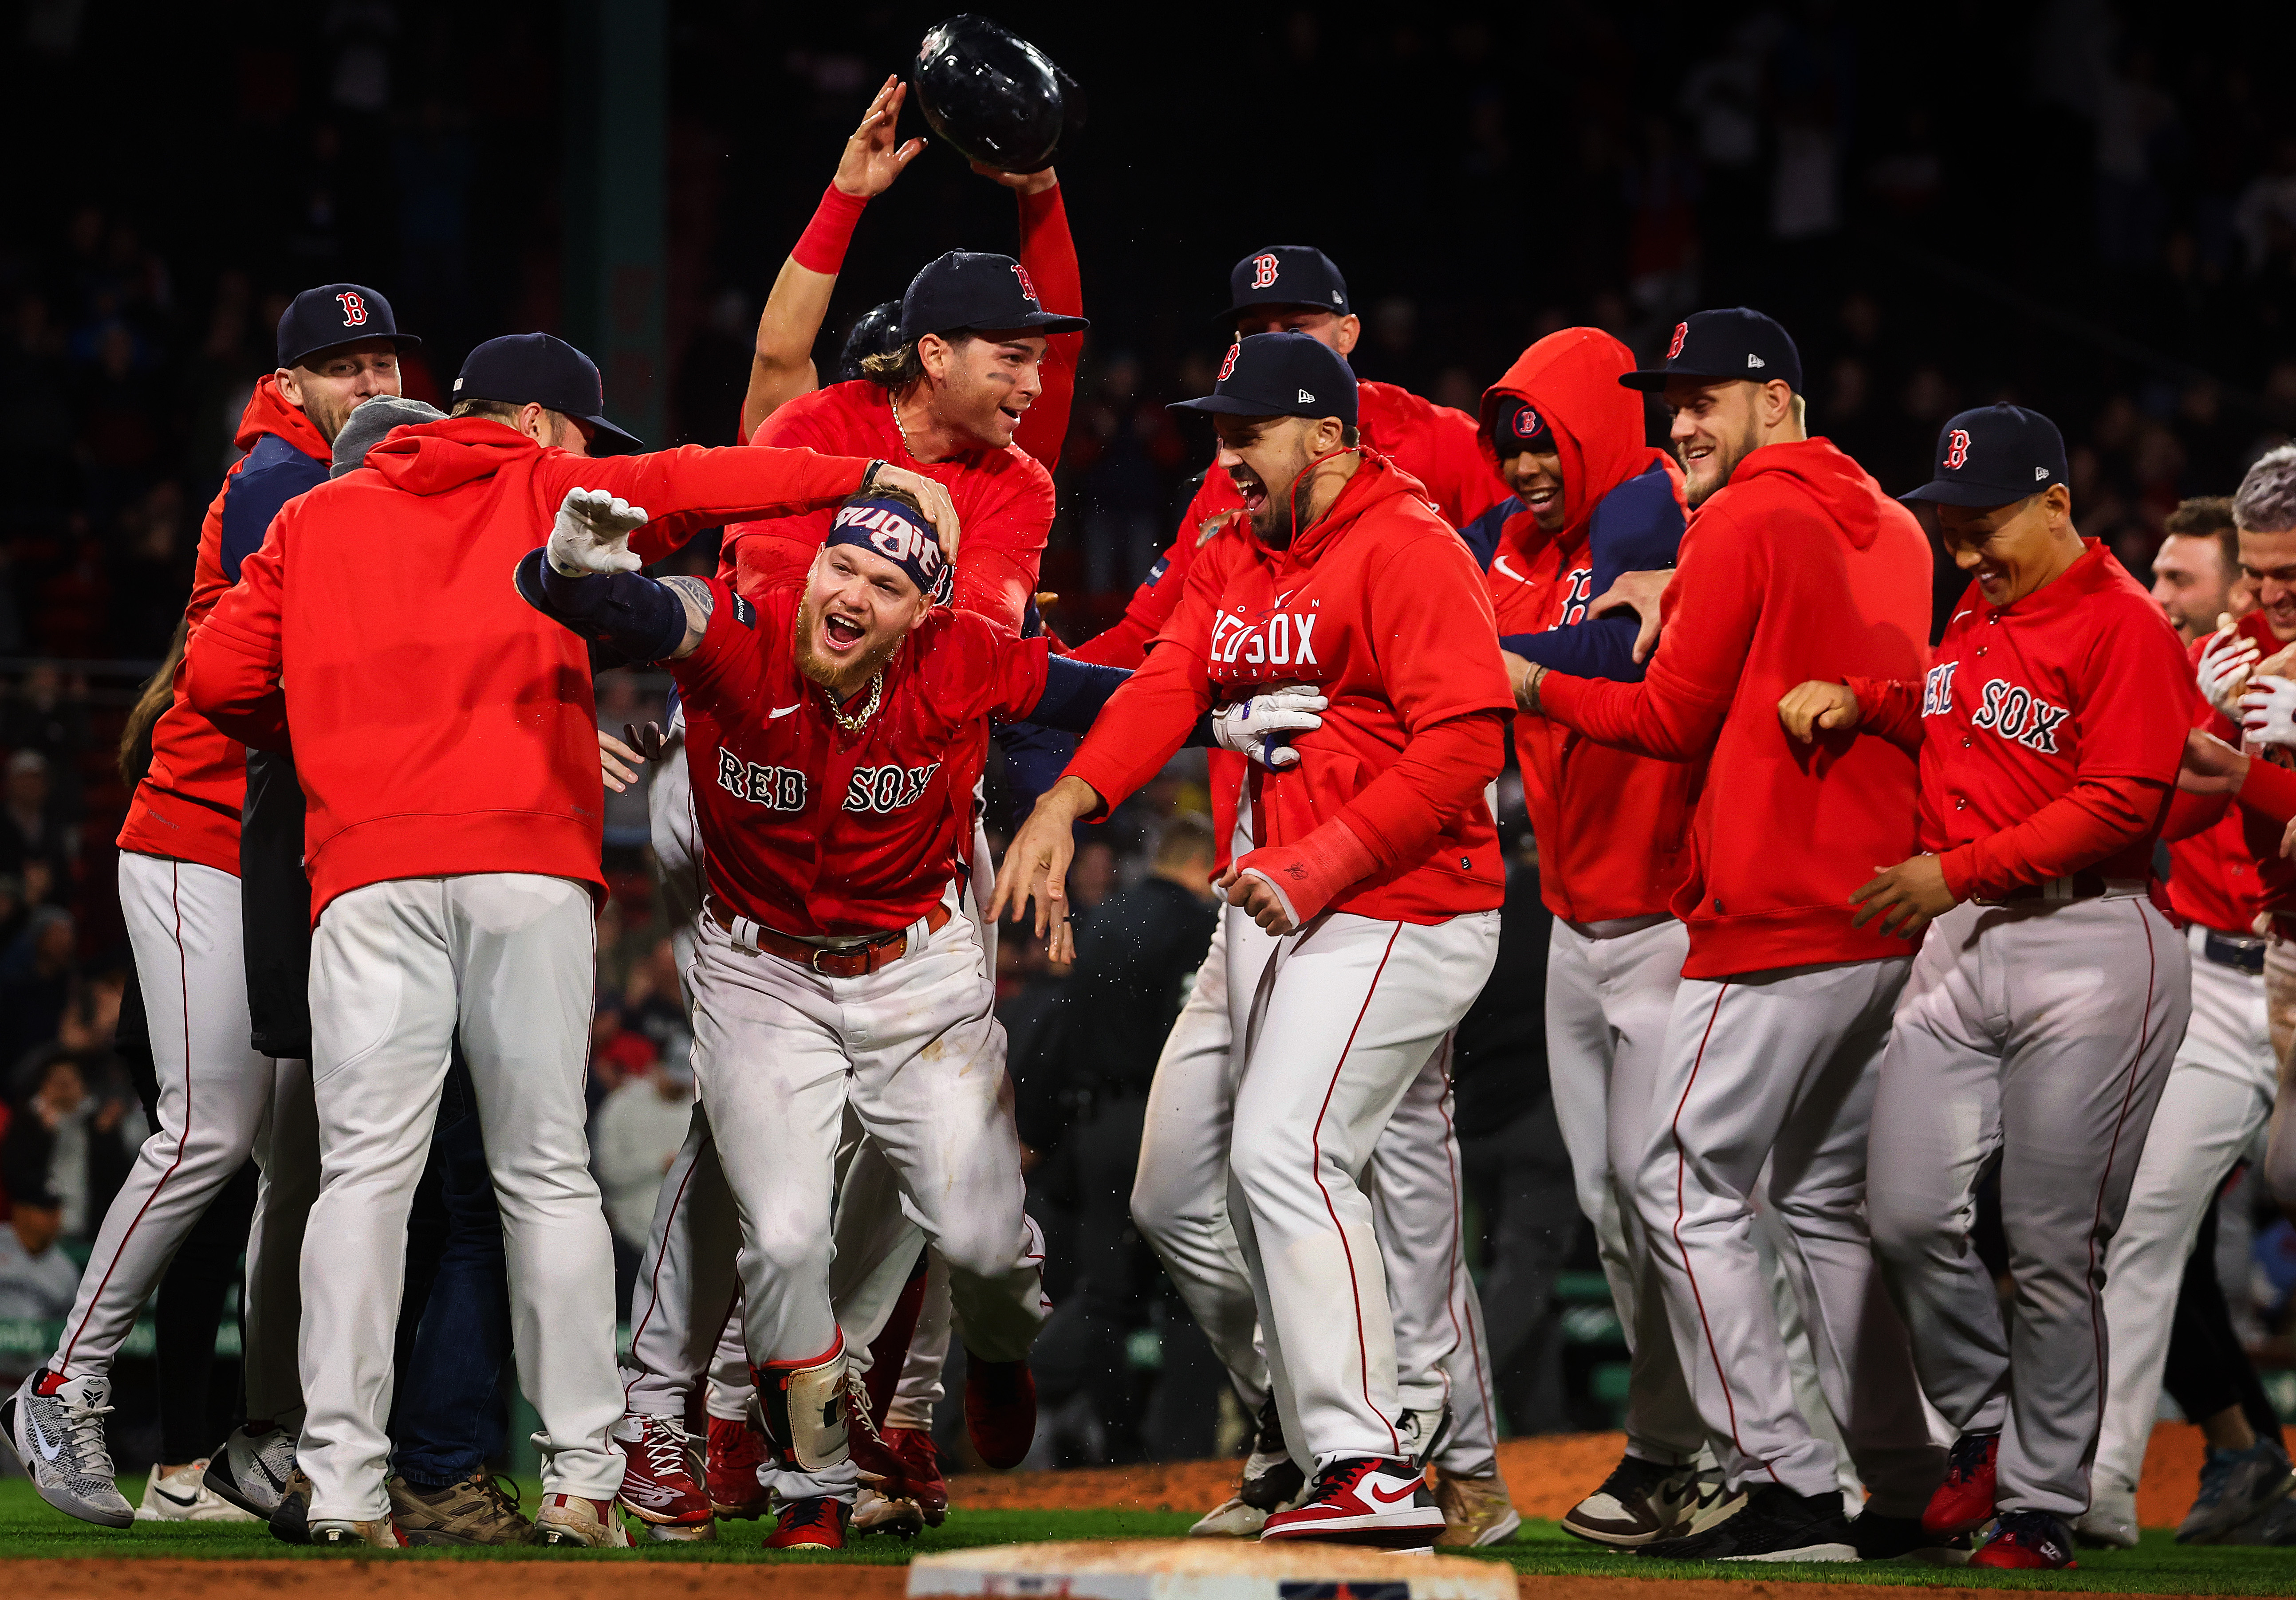 Red Sox beat Nationals 5-4 in series opener